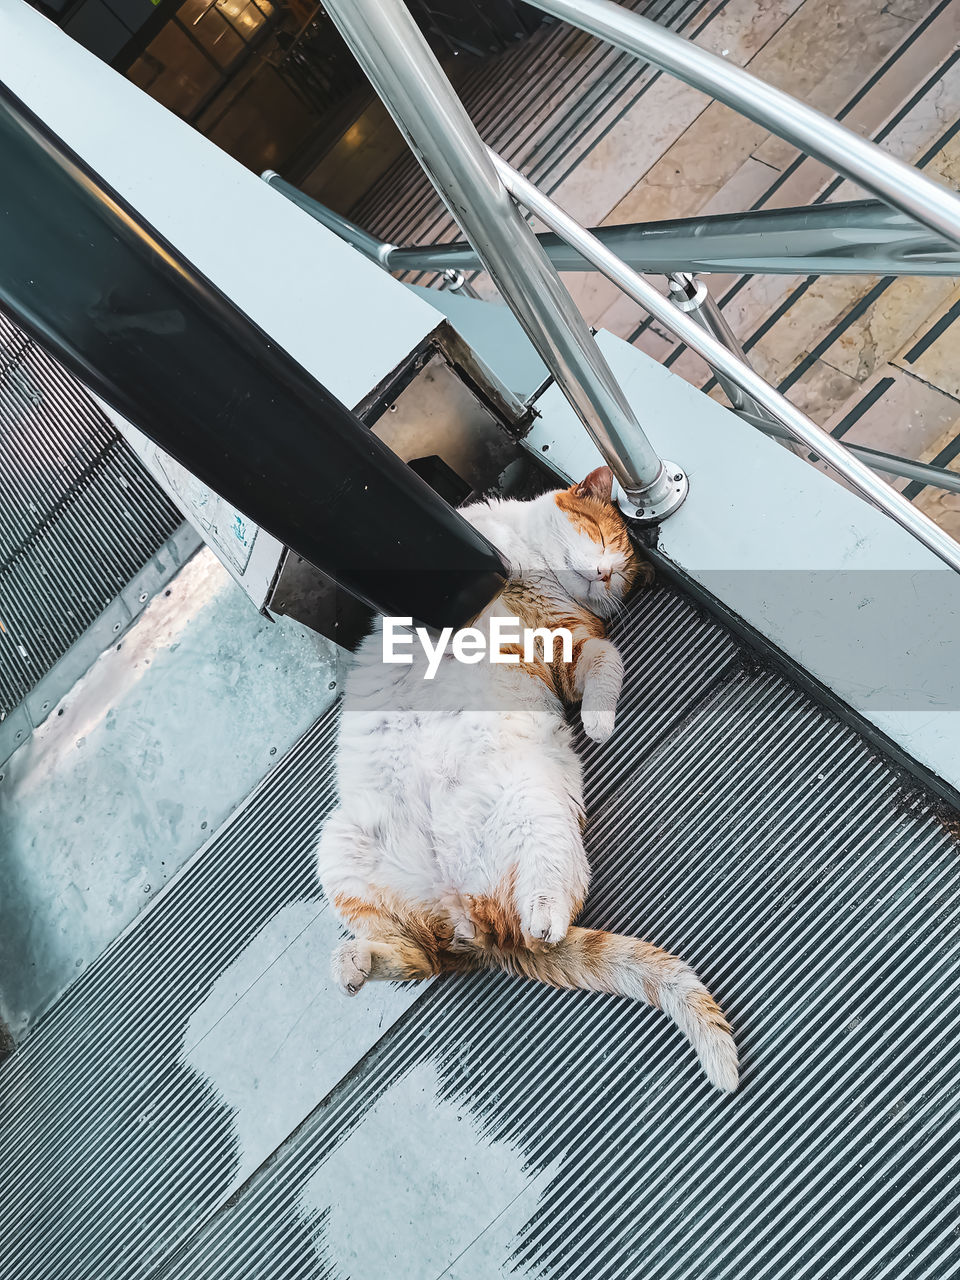 High angle view of cat sleeping on the floor in a metrobus station